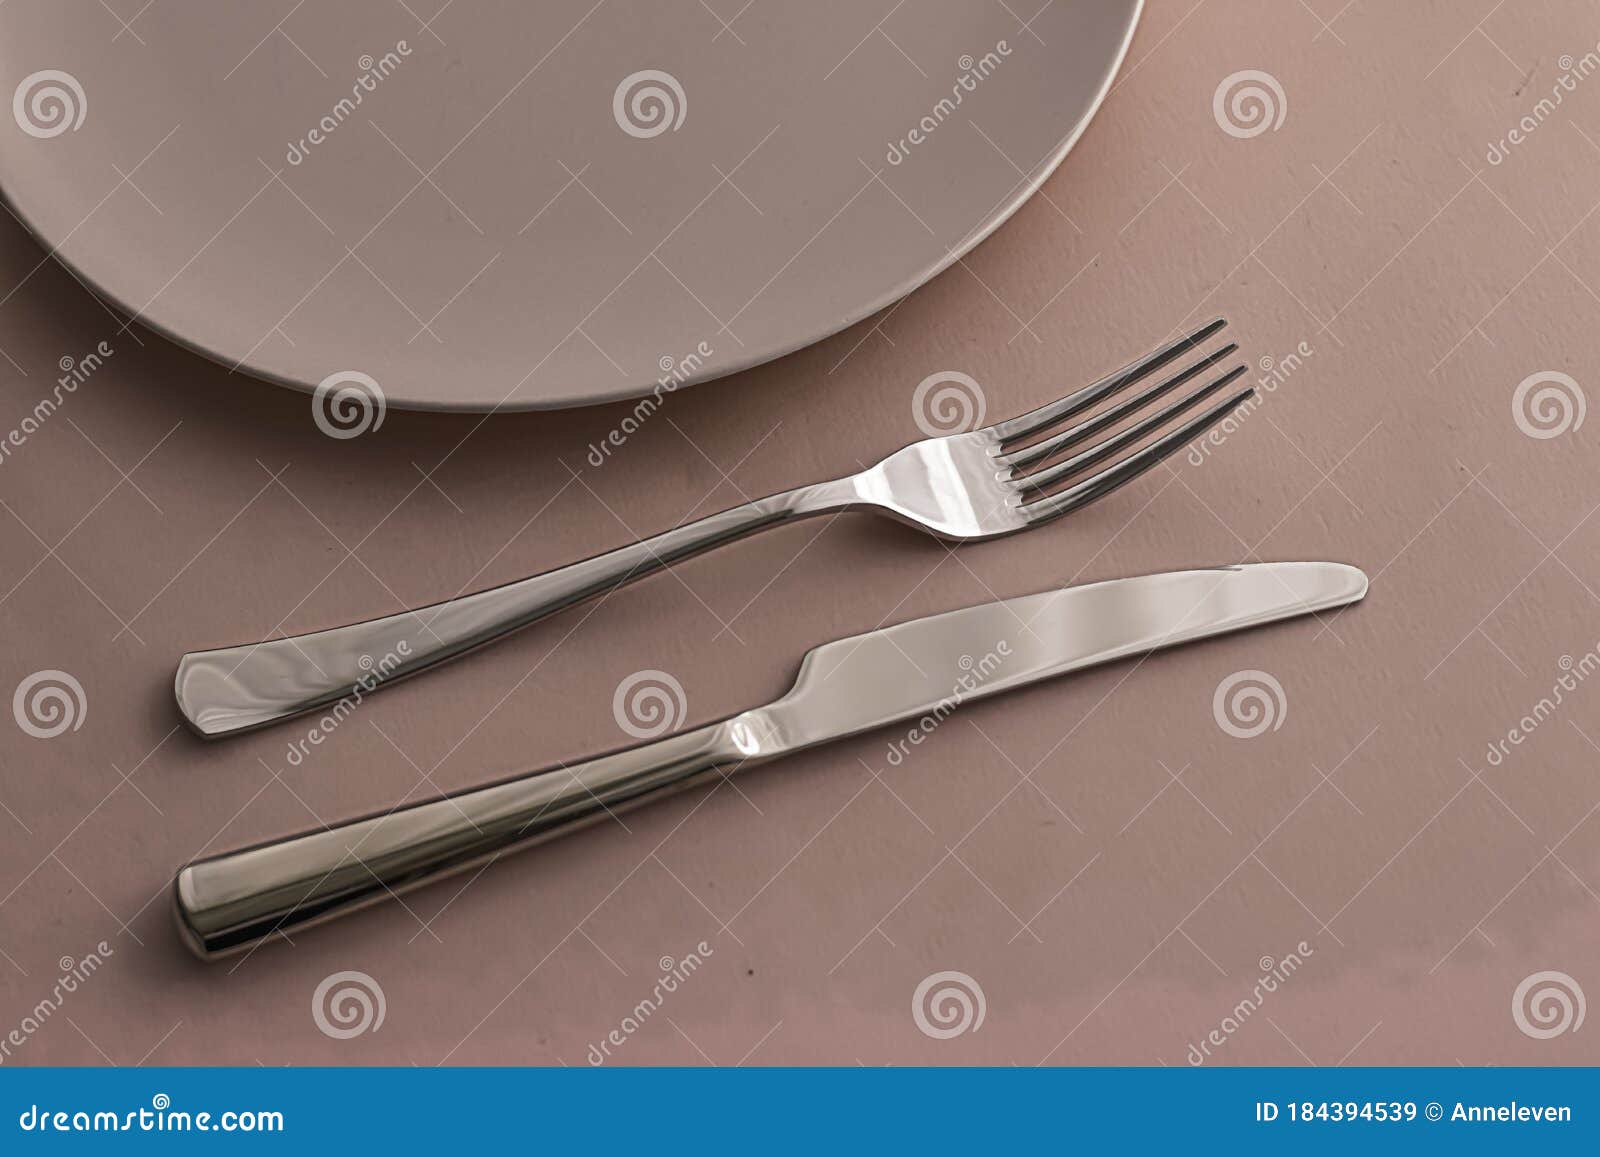 Download Empty Plate And Cutlery As Mockup Set On Brown Background Top Tableware For Chef Table Decor And Menu Branding Stock Image Image Of Chef Bachelor 184394539